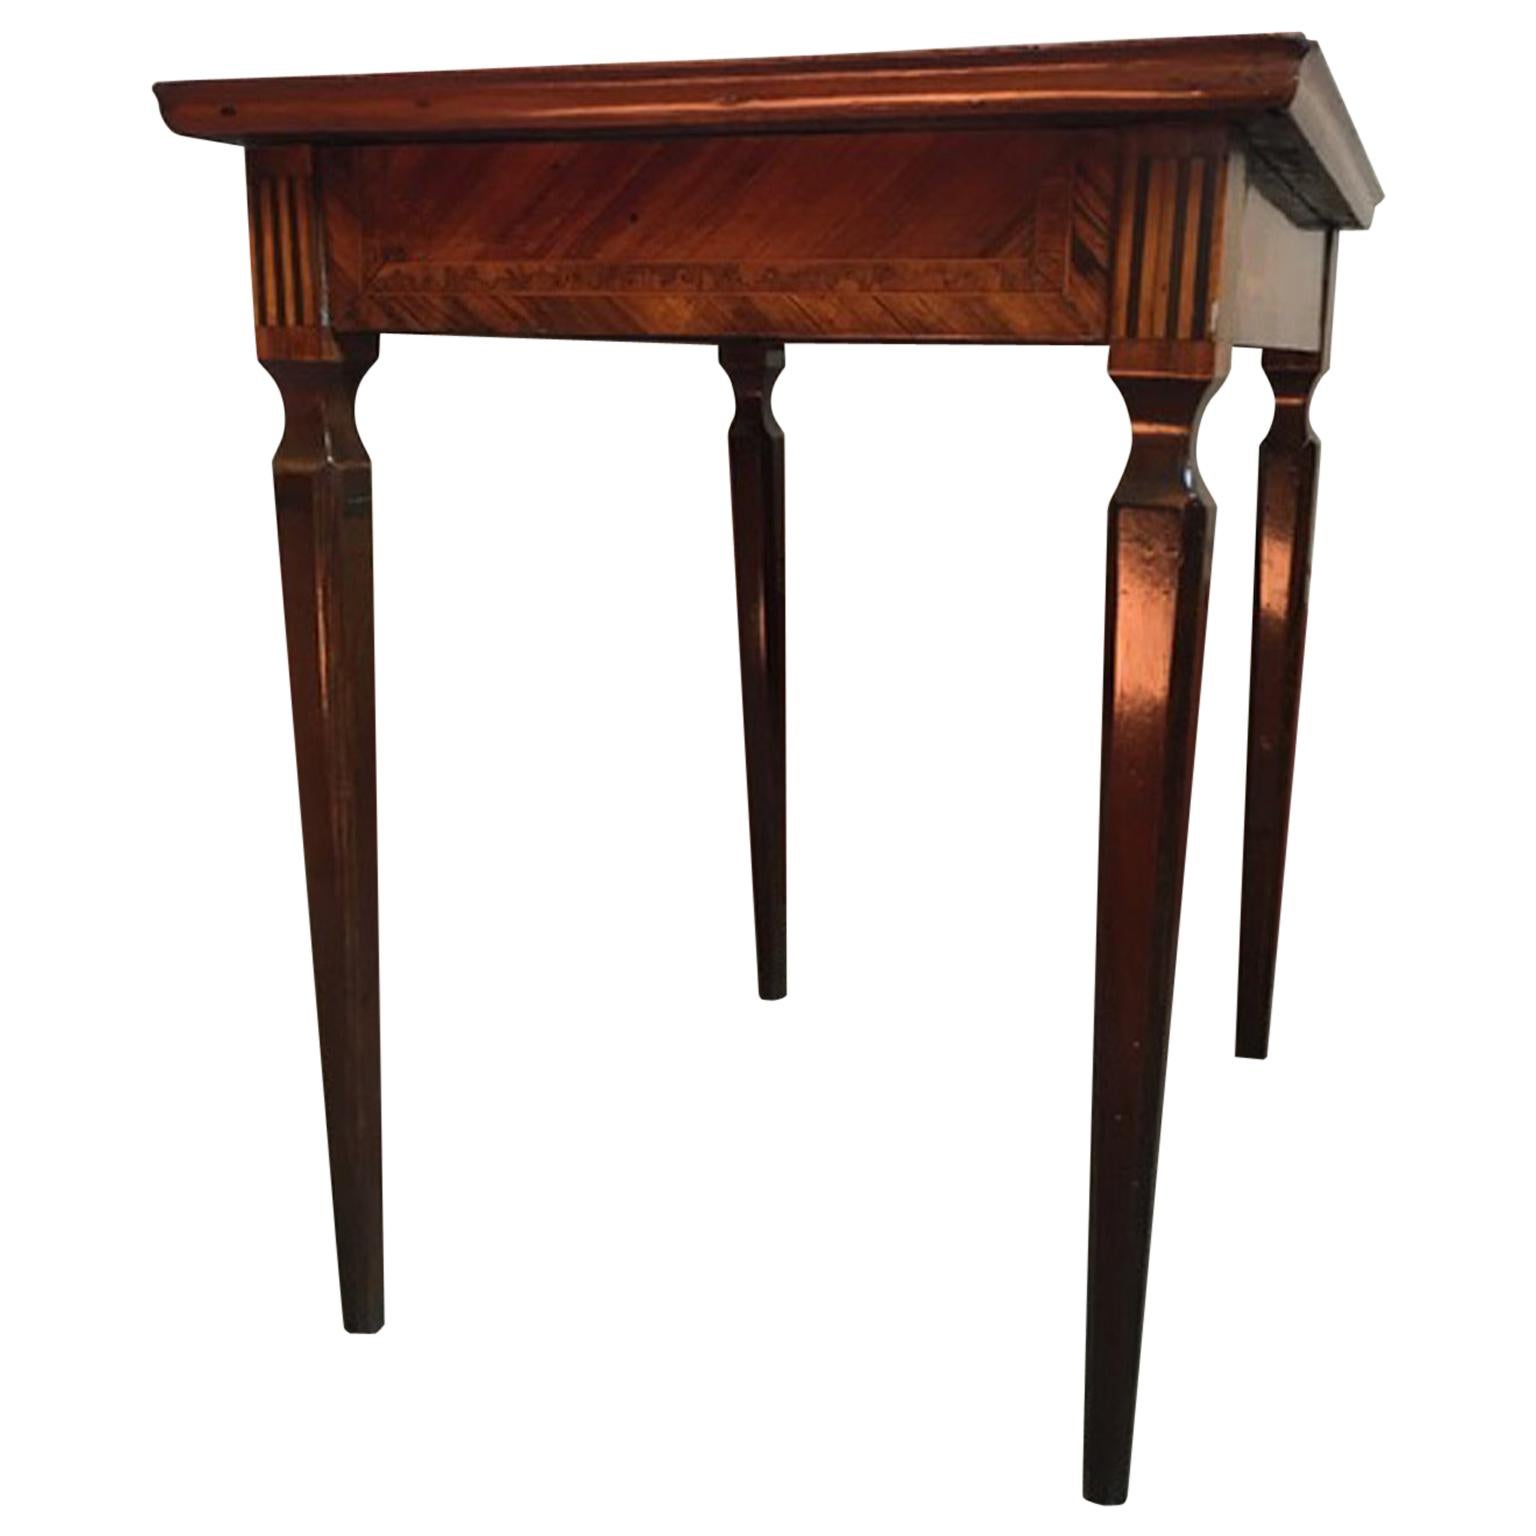 Italy Mid-18th Century Walnut Inlaid Bedside or Side Table with Drawer